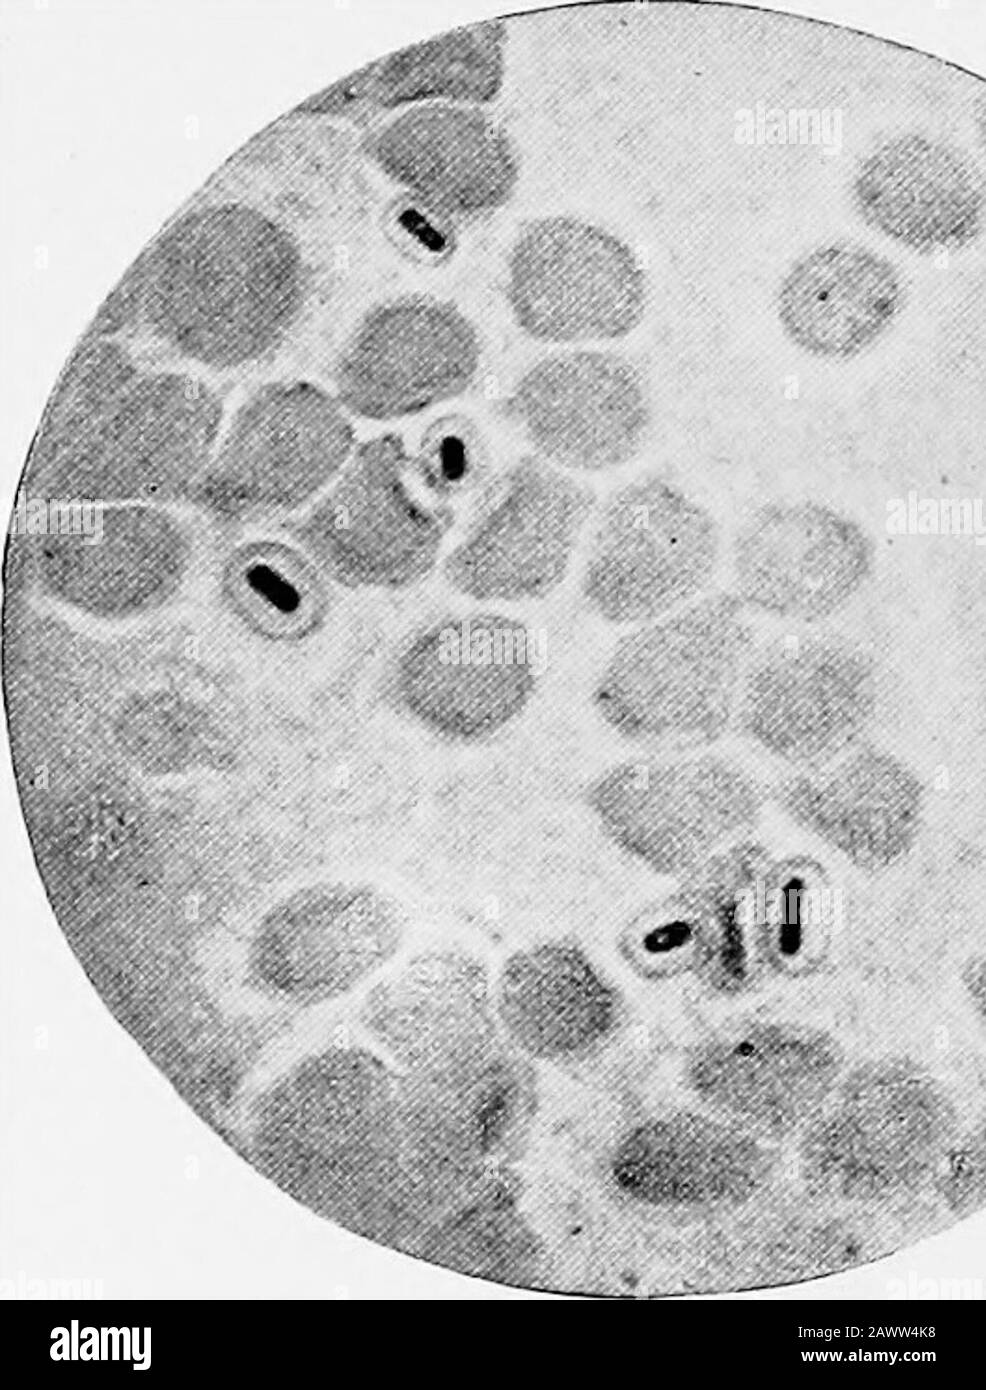 Essentials of bacteriology; being a concise and systematic introduction to the study of bacteria and allied microörganisms . Usually found inpairs, sometimes in filaments of three and four elements. Inthe material from the body a capsule surrounds each coccus.In the artificial cultures this is not found (Figs. 71 and 72). Properties.—^Variable in form, approaching the bacillaryt3rpe. Do not liquefy gelatin. There are no spores. Non-motile. Growth.—Best between 27° C. and 41° C, seldom below25° C. Facultative anaerobic. The culture-media must beslightly alkaline; the growth is slow. iS8 ESSENT Stock Photo